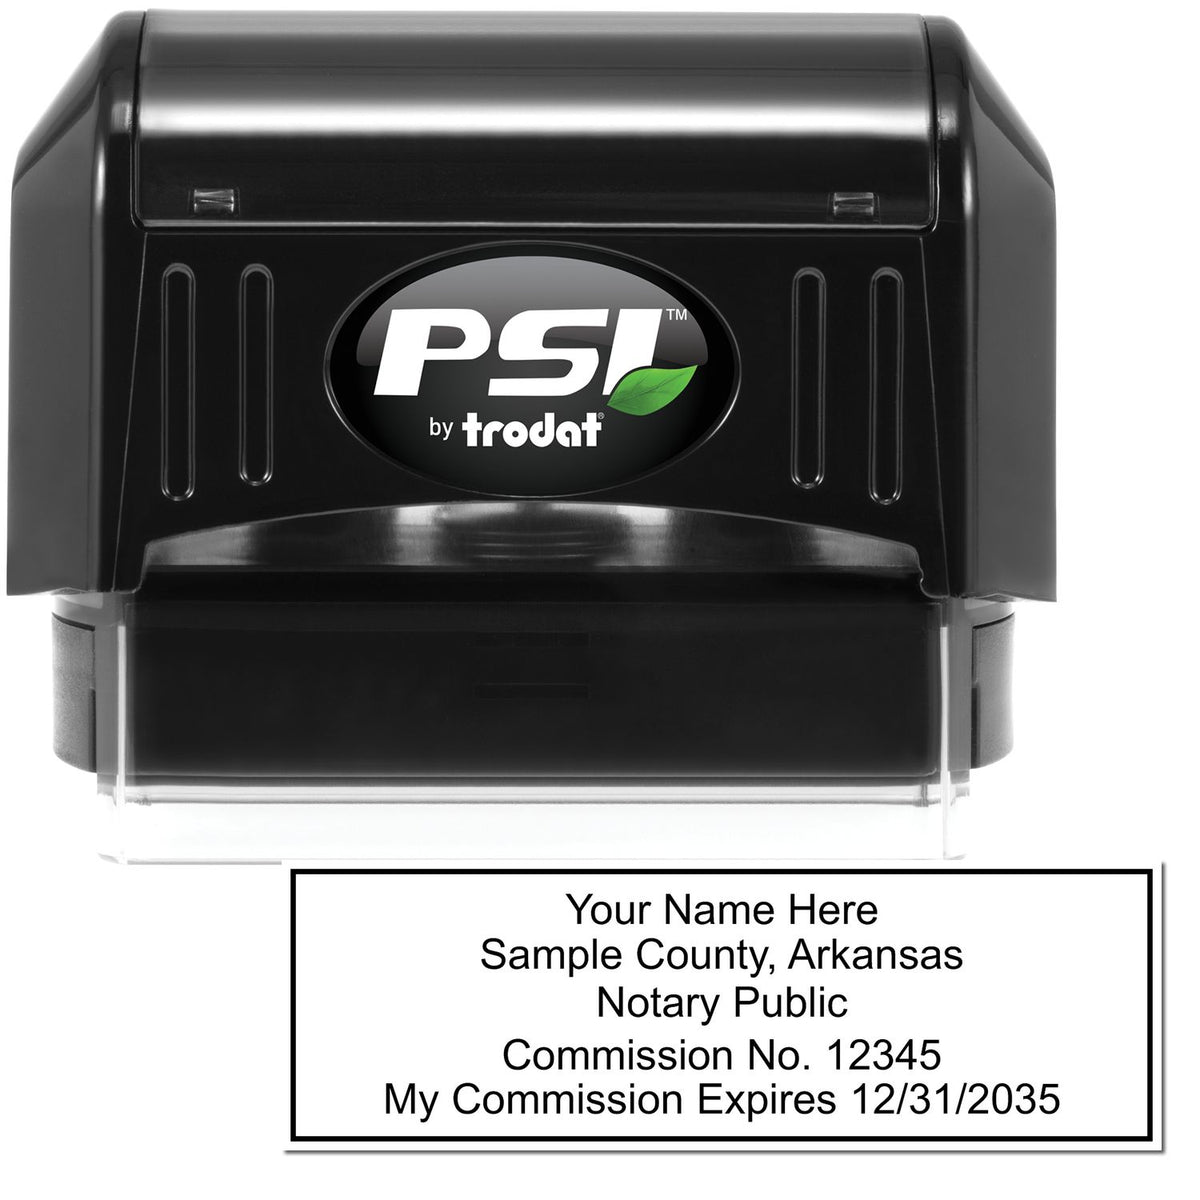 The main image for the PSI Arkansas Notary Stamp depicting a sample of the imprint and electronic files